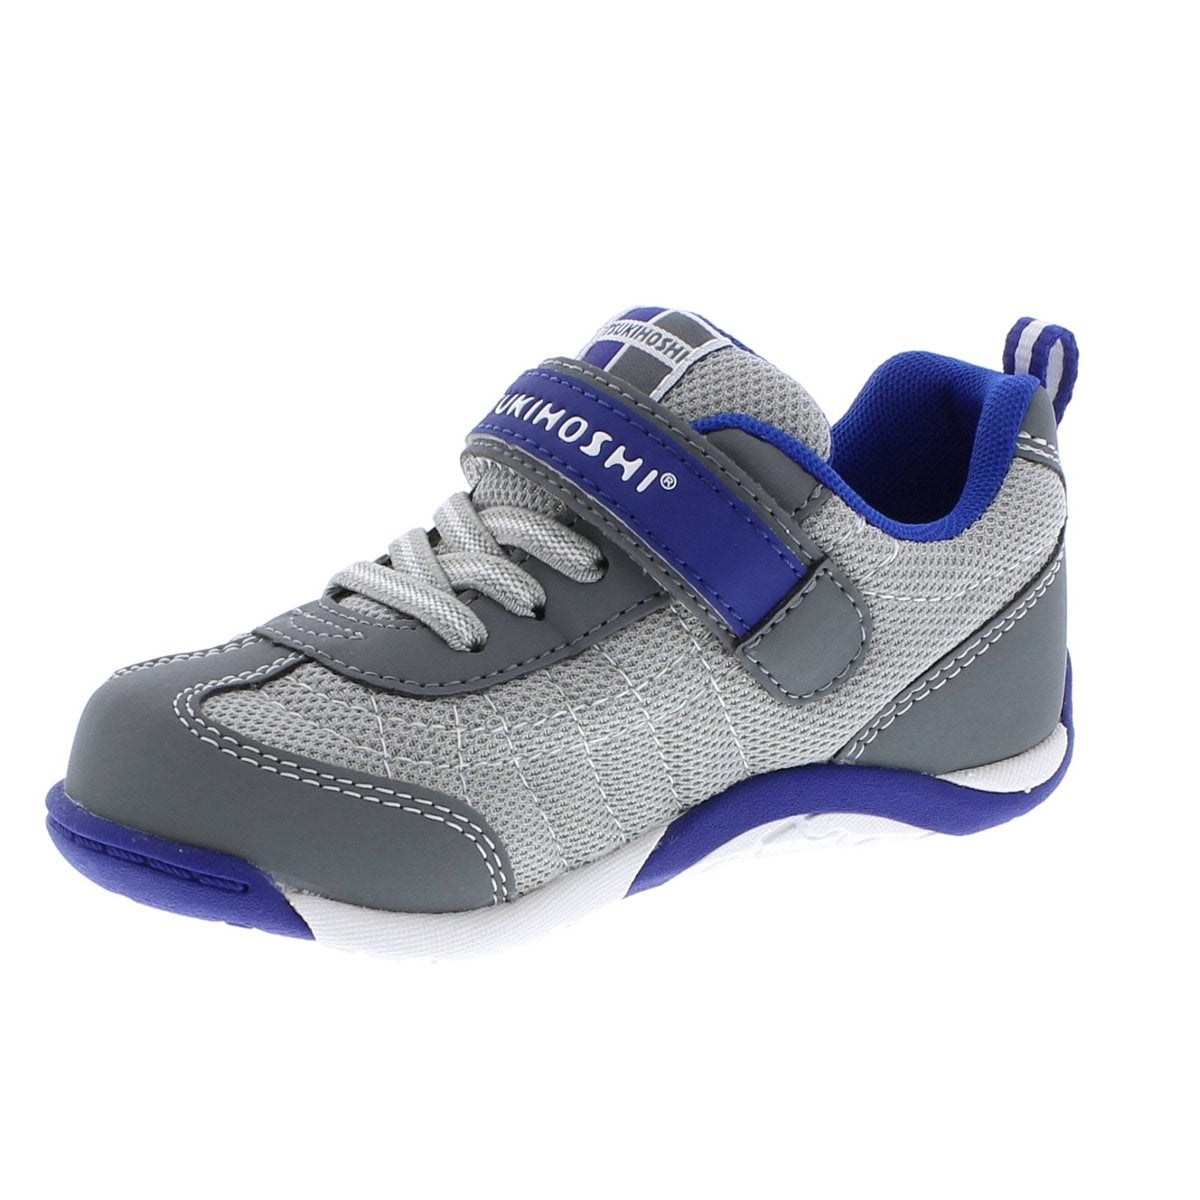 Childrens Tsukihoshi Kaz Sneaker in Gray/Royal from the front view